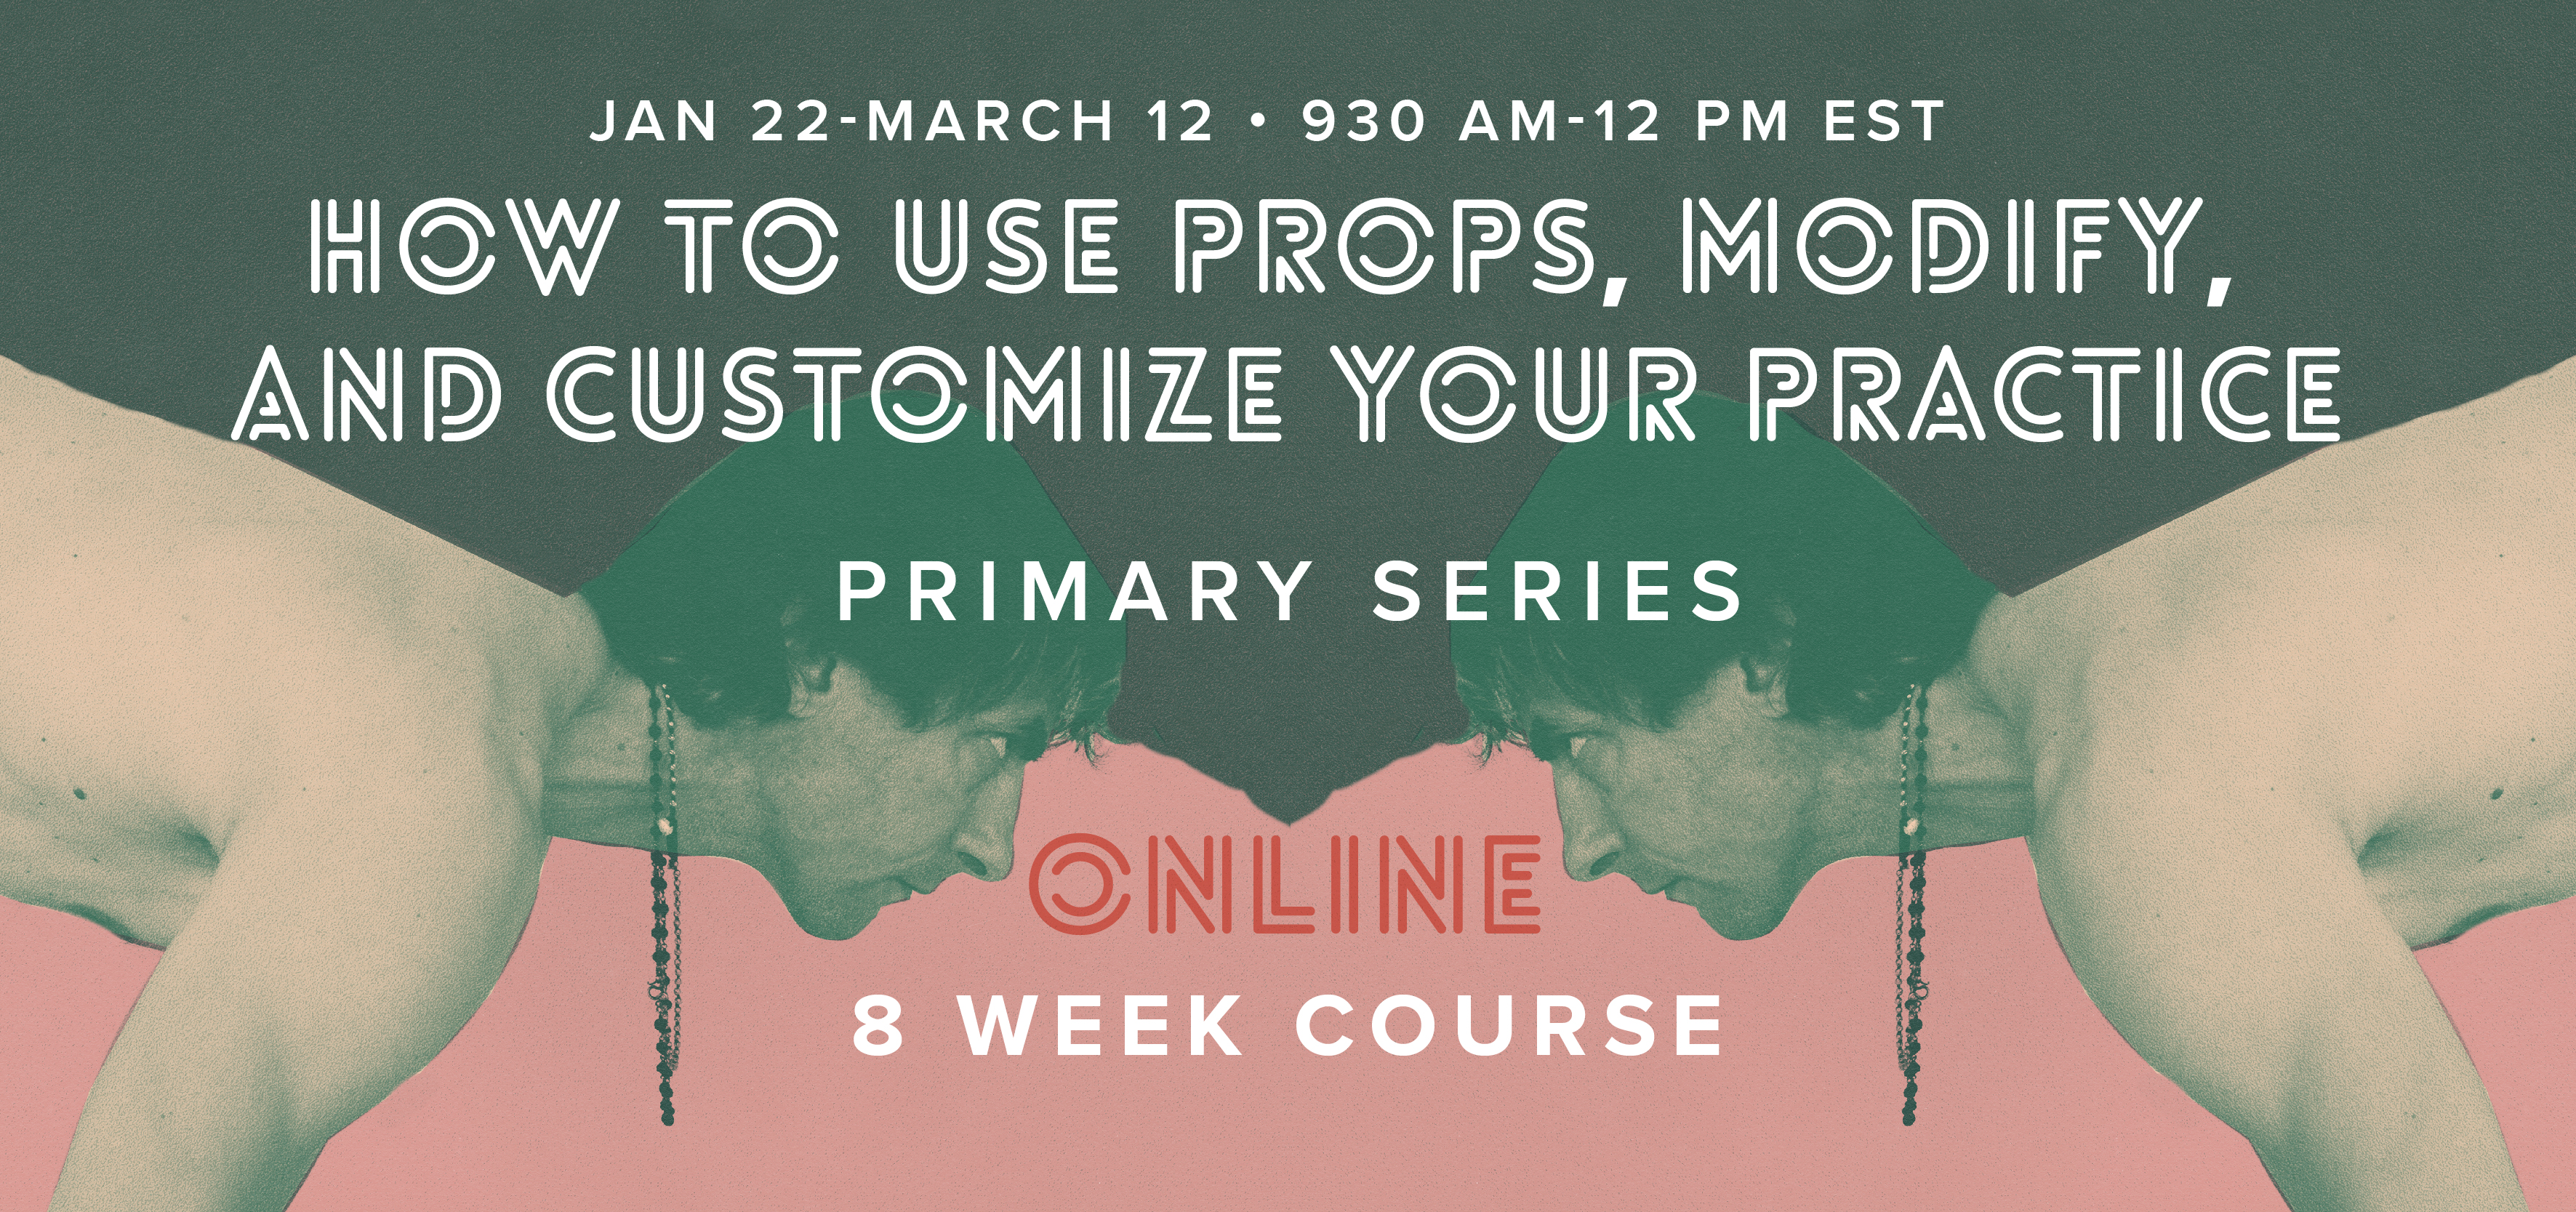 How to use Props, Modify, and Customize Your Practice